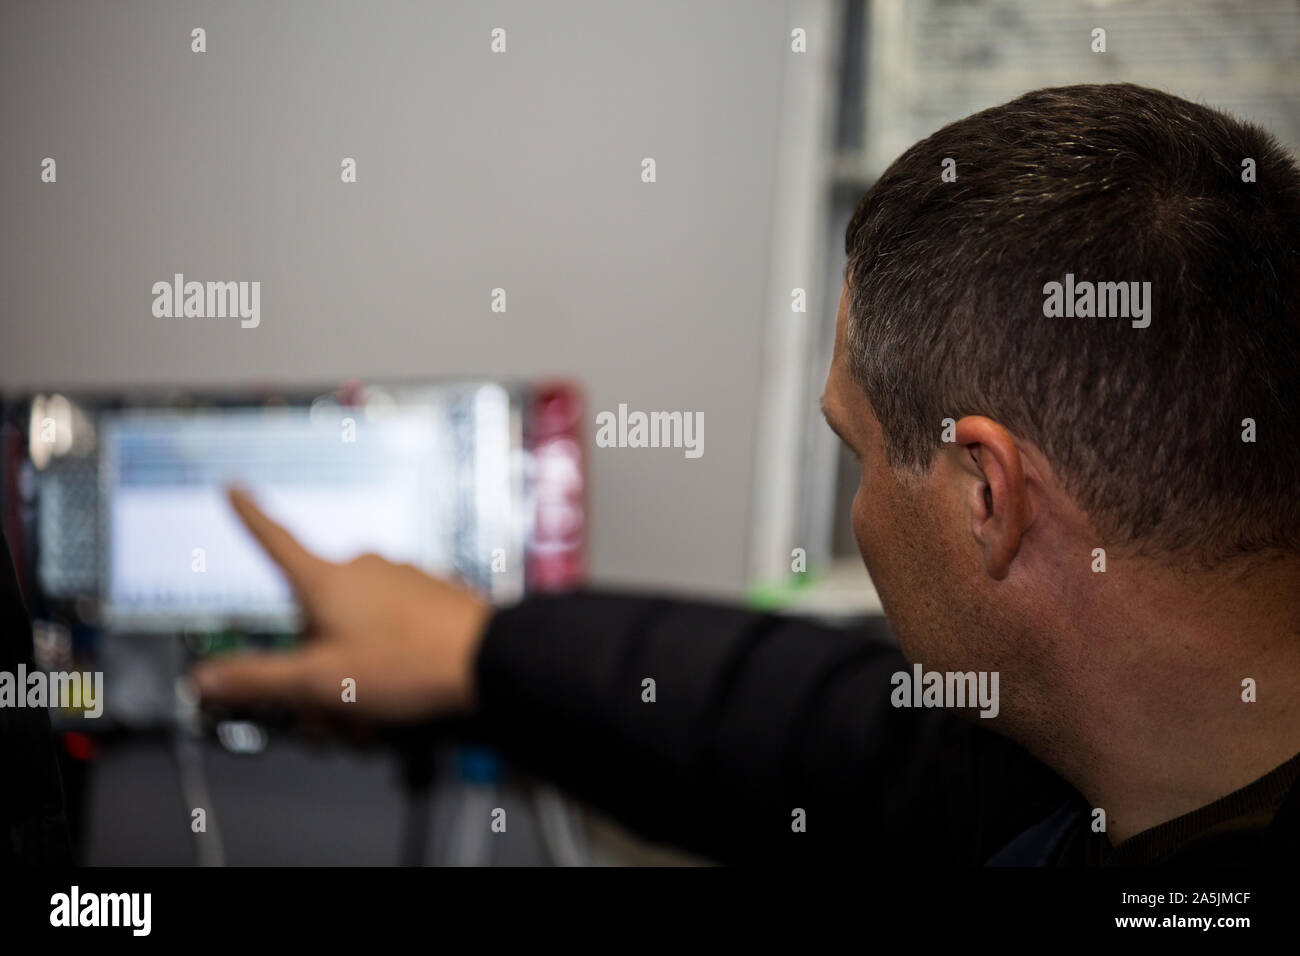 Male engineer reaches touch screen of a controlling console at Petrol Station near Kiev, as specialists install remote fuels gaging system. Stock Photo